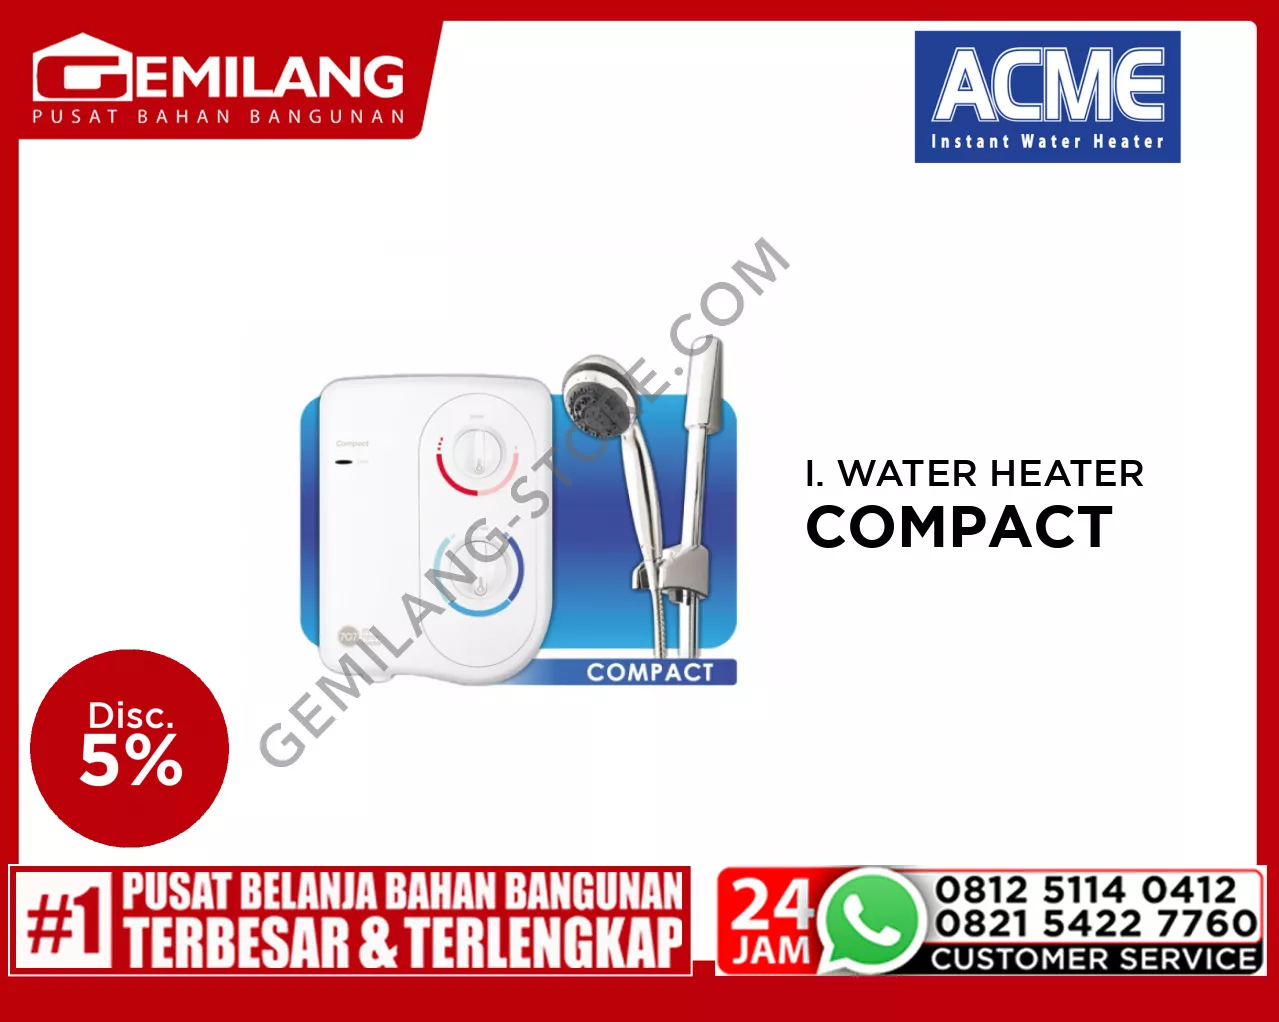 ACME INSTANT WATER HEATER TYPE COMPACT